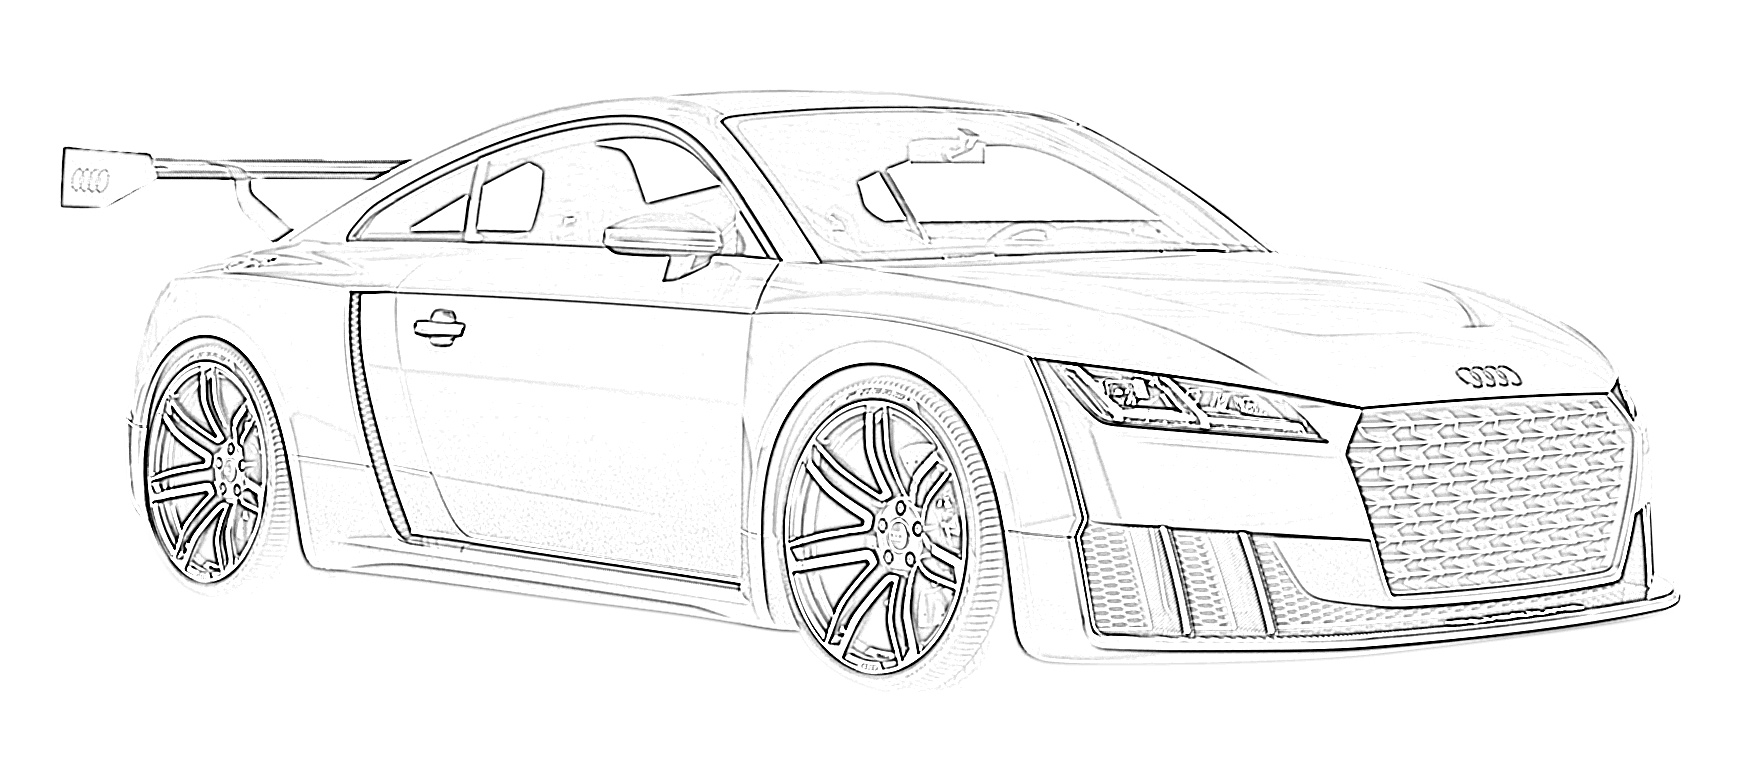 17 Free Sports Car Coloring Pages for Kids | Save, Print ...